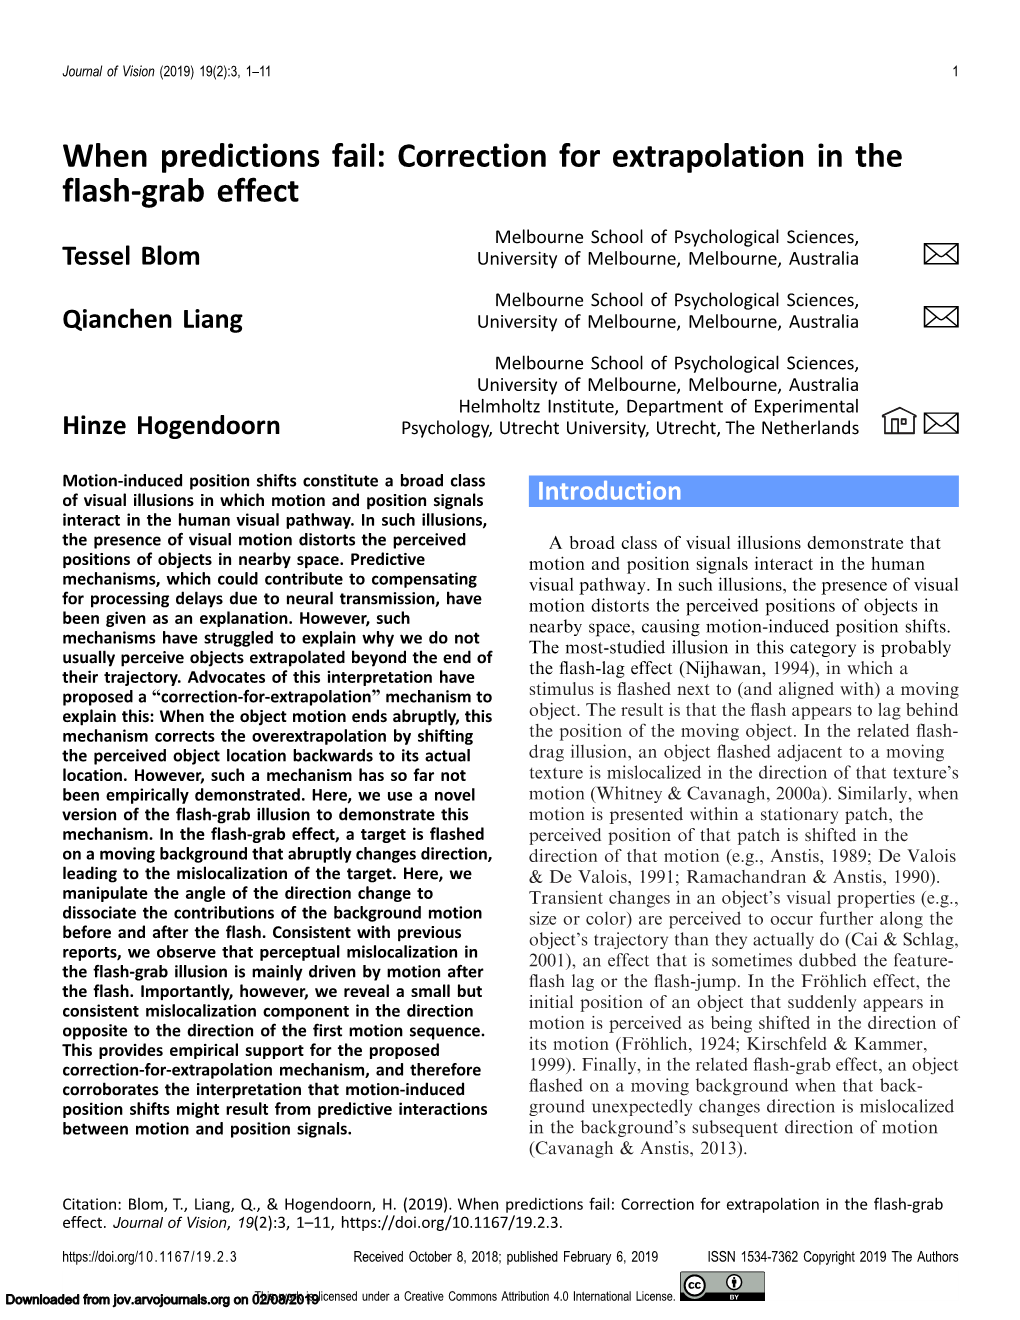 When Predictions Fail: Correction for Extrapolation in the Flash-Grab Effect